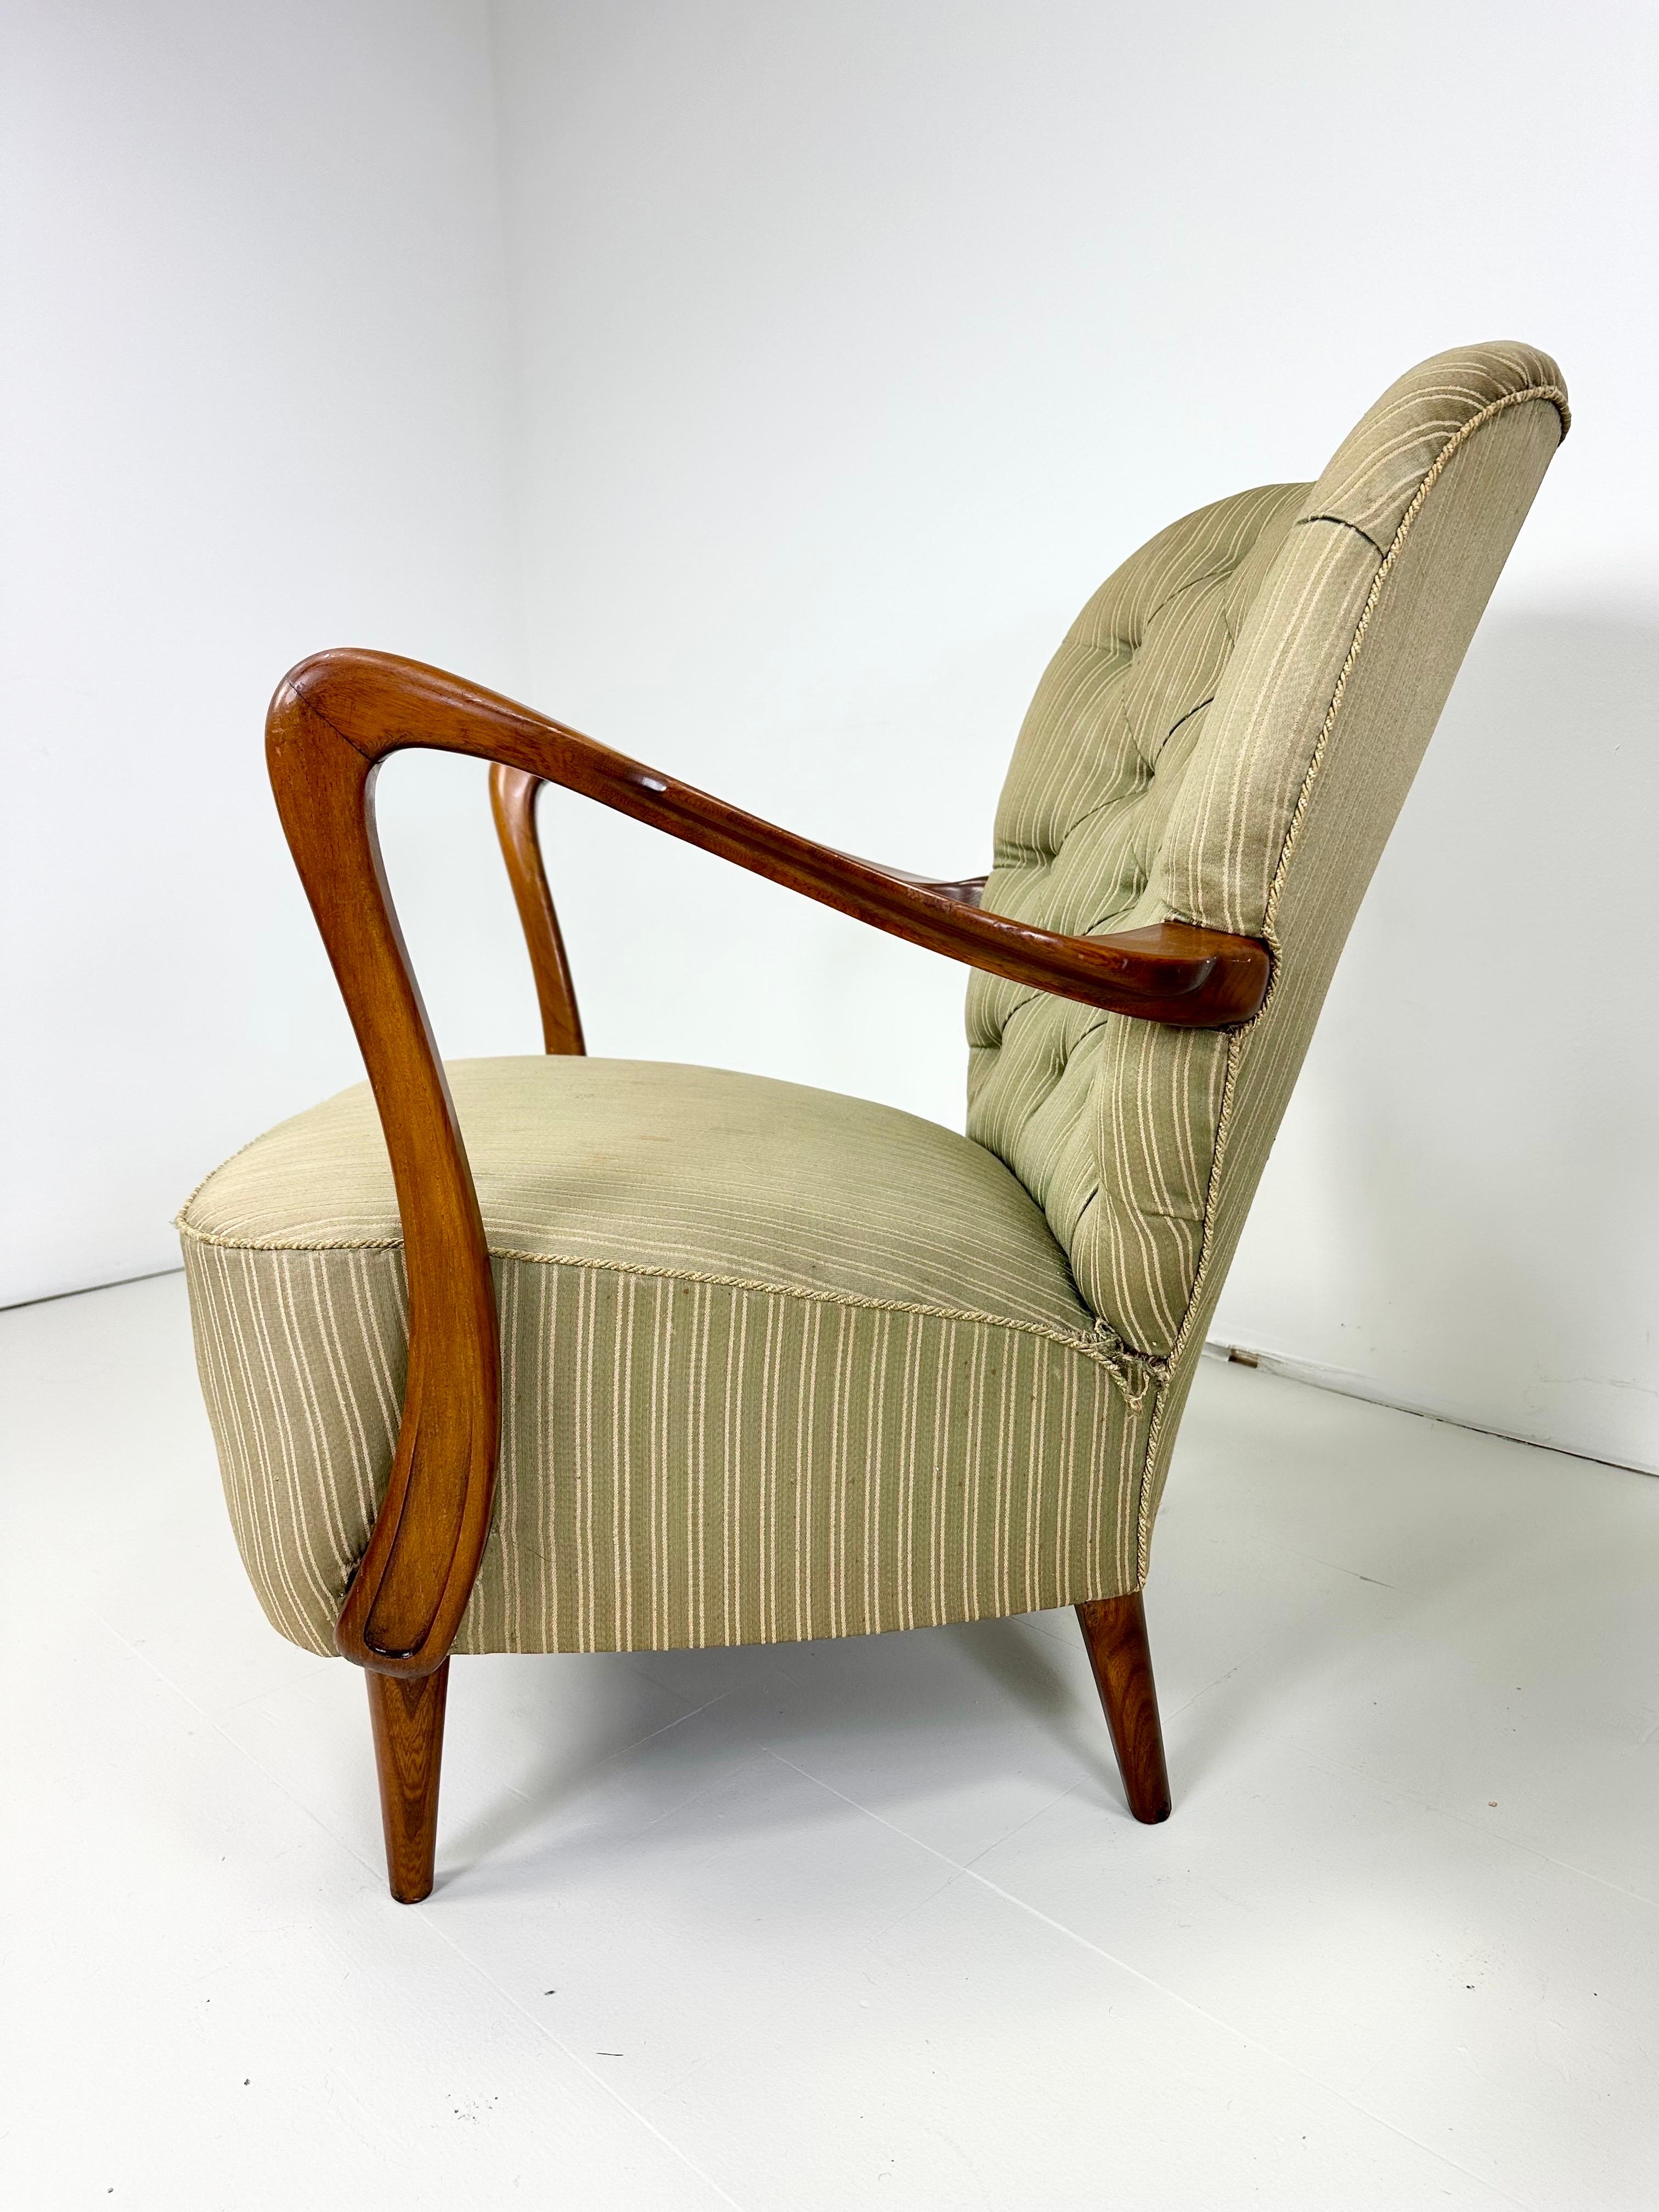 Pair of 1940’s Swedish Lounge Chairs In Good Condition For Sale In Turners Falls, MA